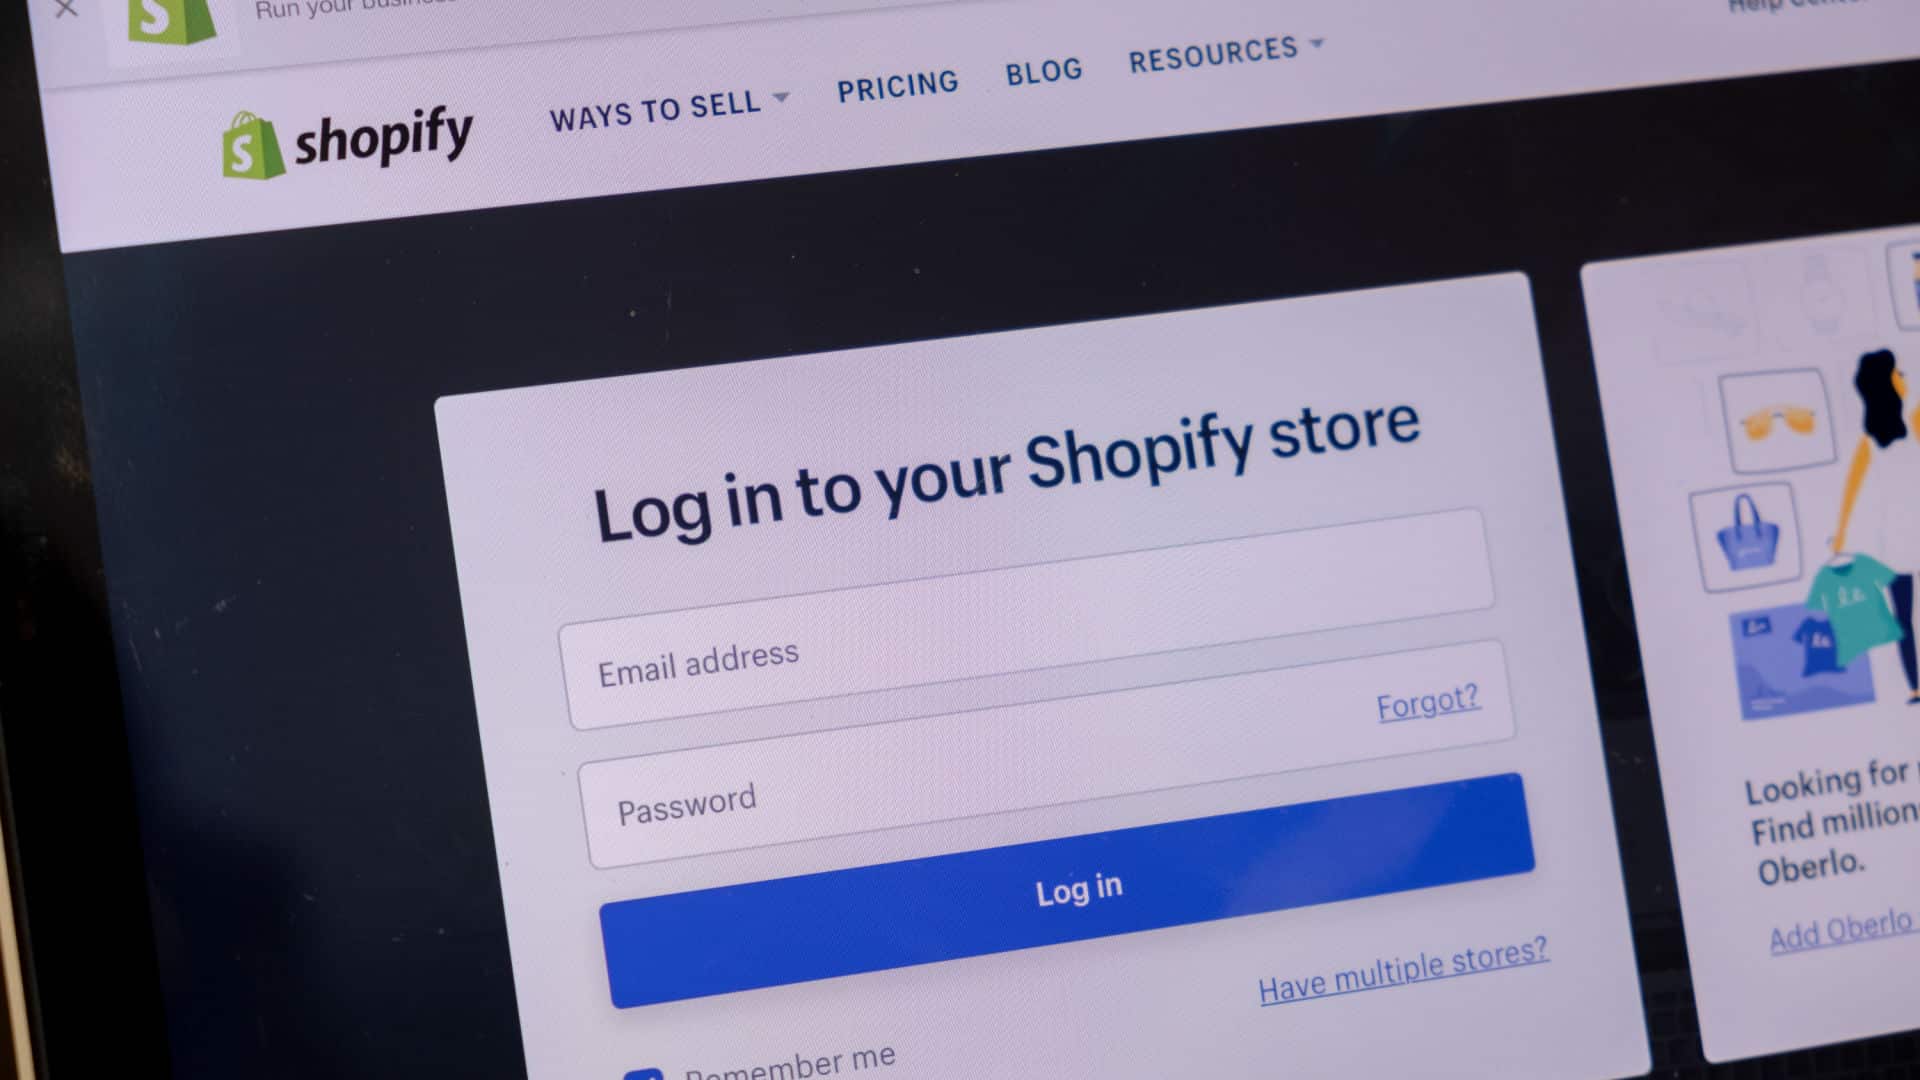 Microsoft partners with Shopify to help retailers expand their reach